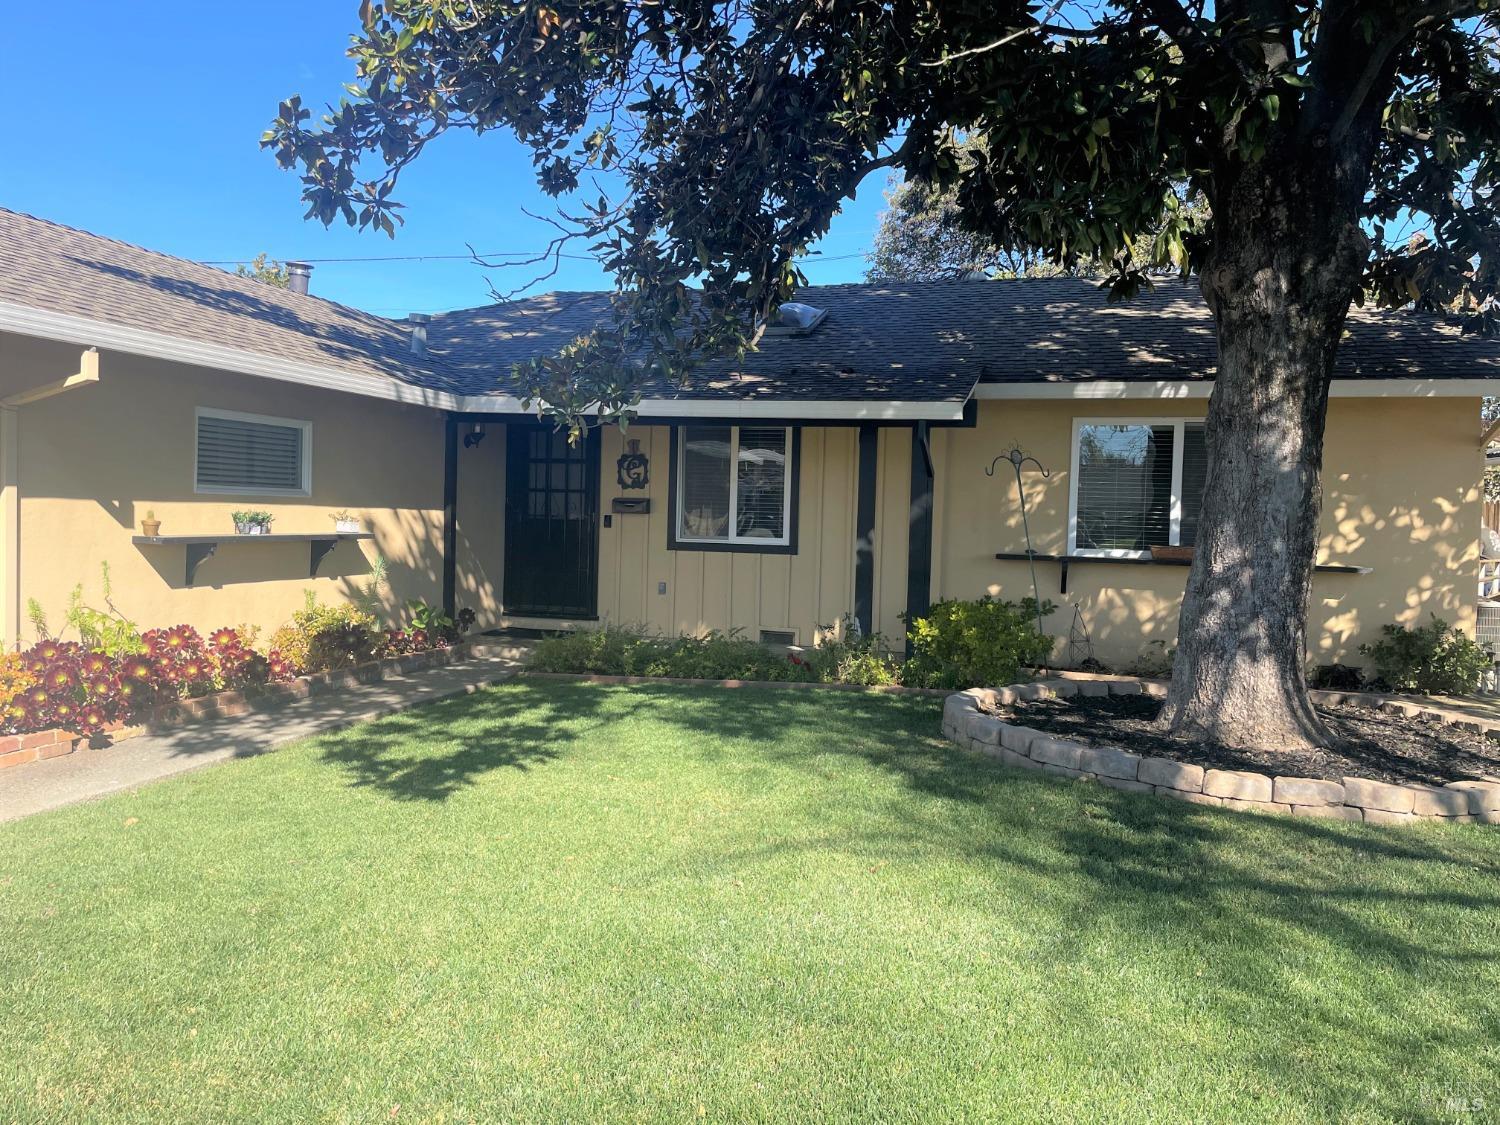 Photo of 428 Cottonwood St in Vacaville, CA